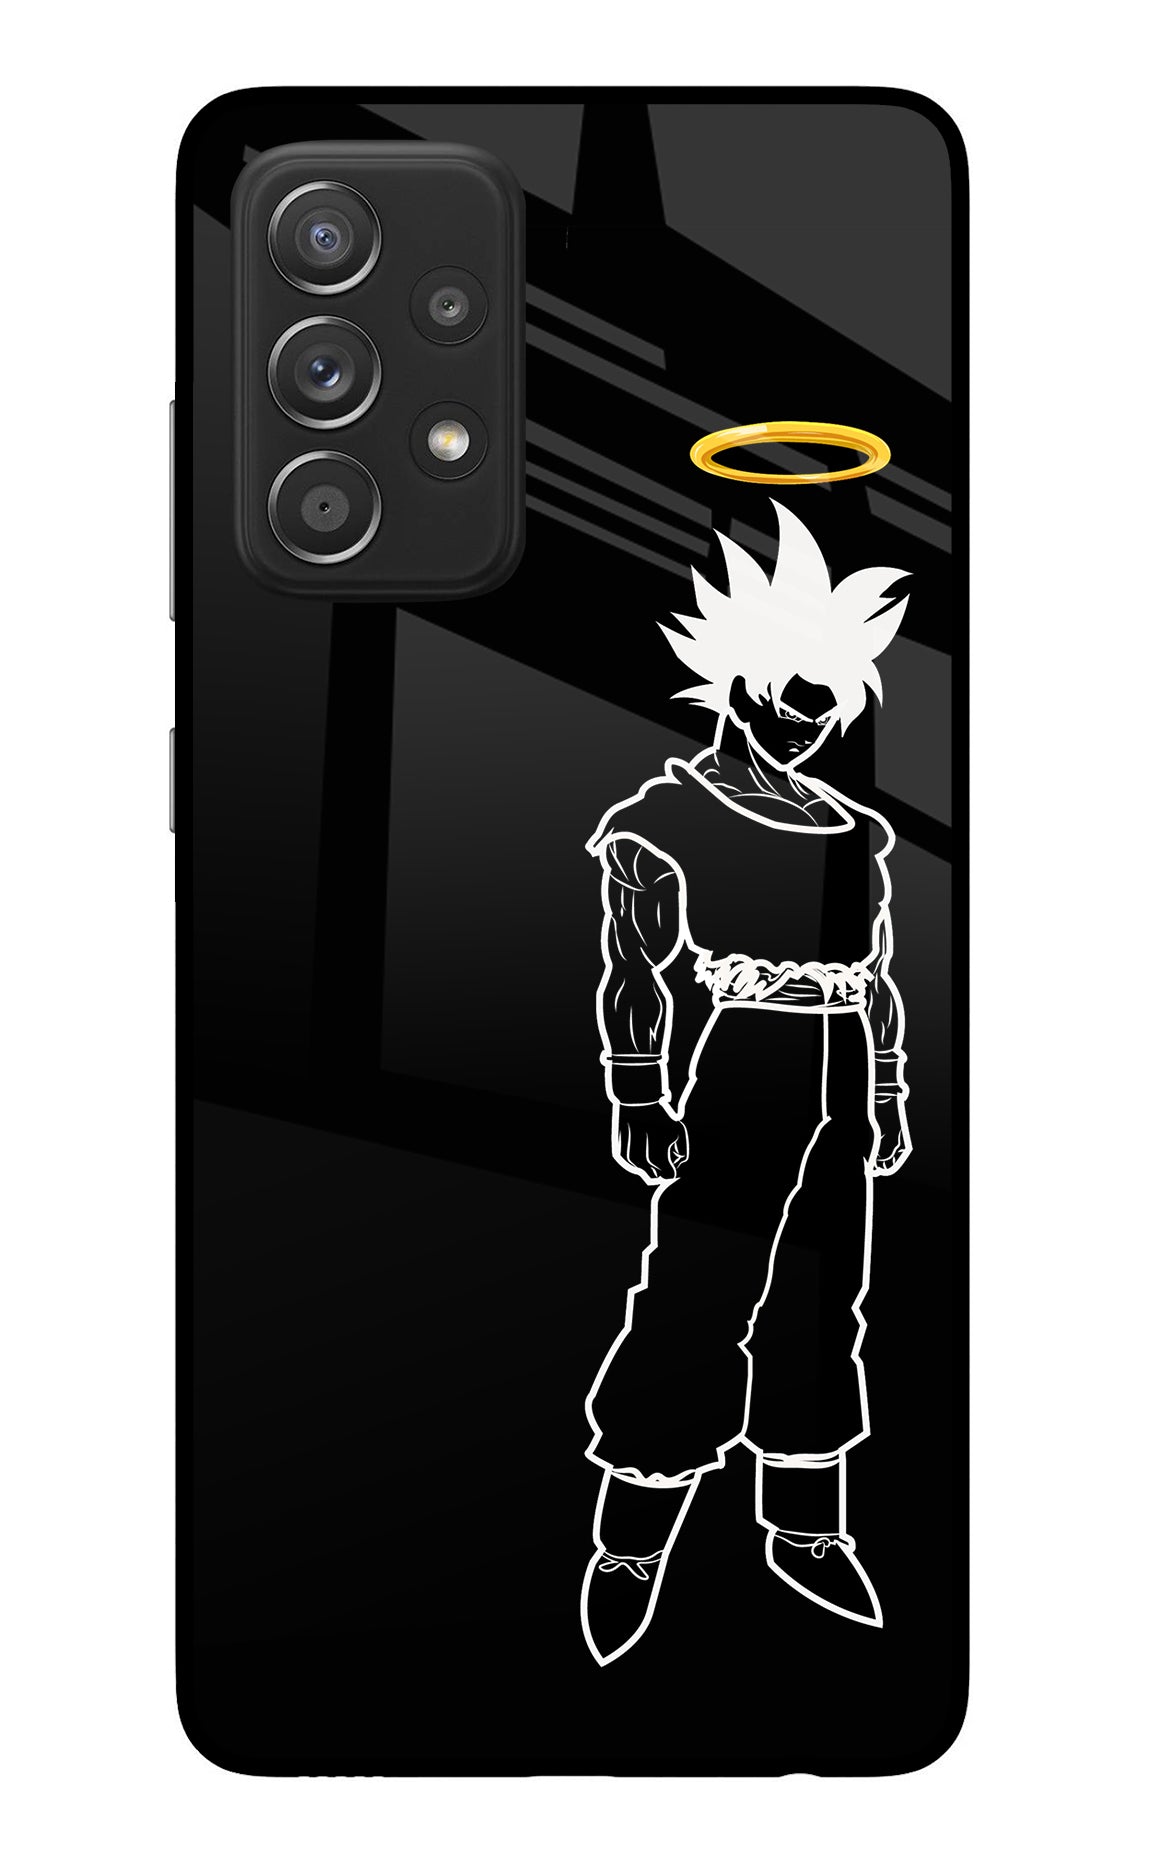 DBS Character Samsung A52/A52s 5G Back Cover